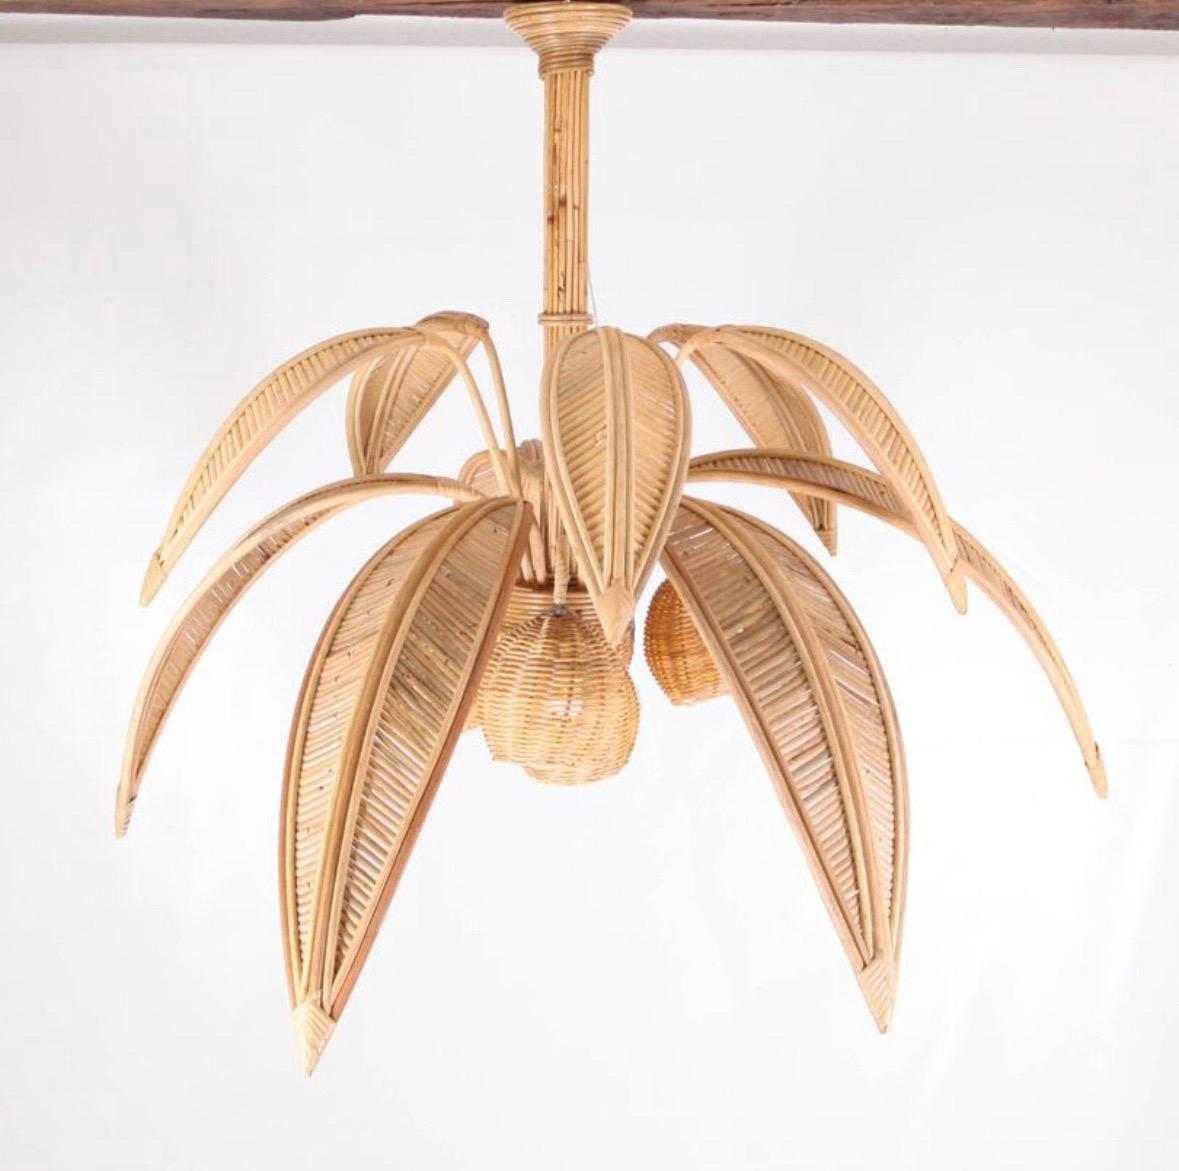 Rattan « coconut tree/palm tree » ceiling light For Sale 2